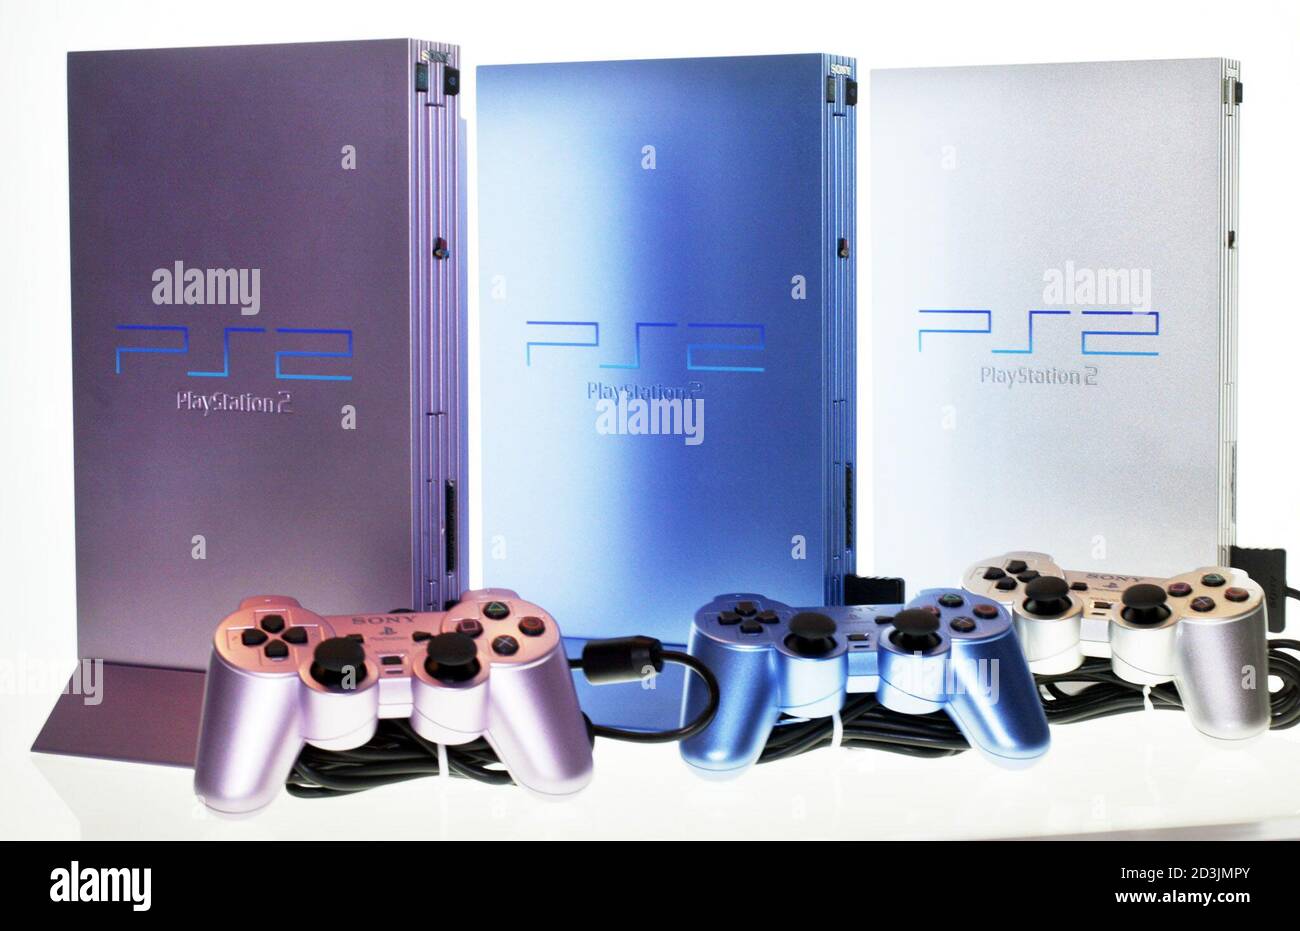 Sony Computer Entertainment displays new colour models of PlayStation 2 at  a Sony showroom in Tokyo February 7, 2003. PlayStation 2 will come in three  differrent colours - silver, sakura (pink) and